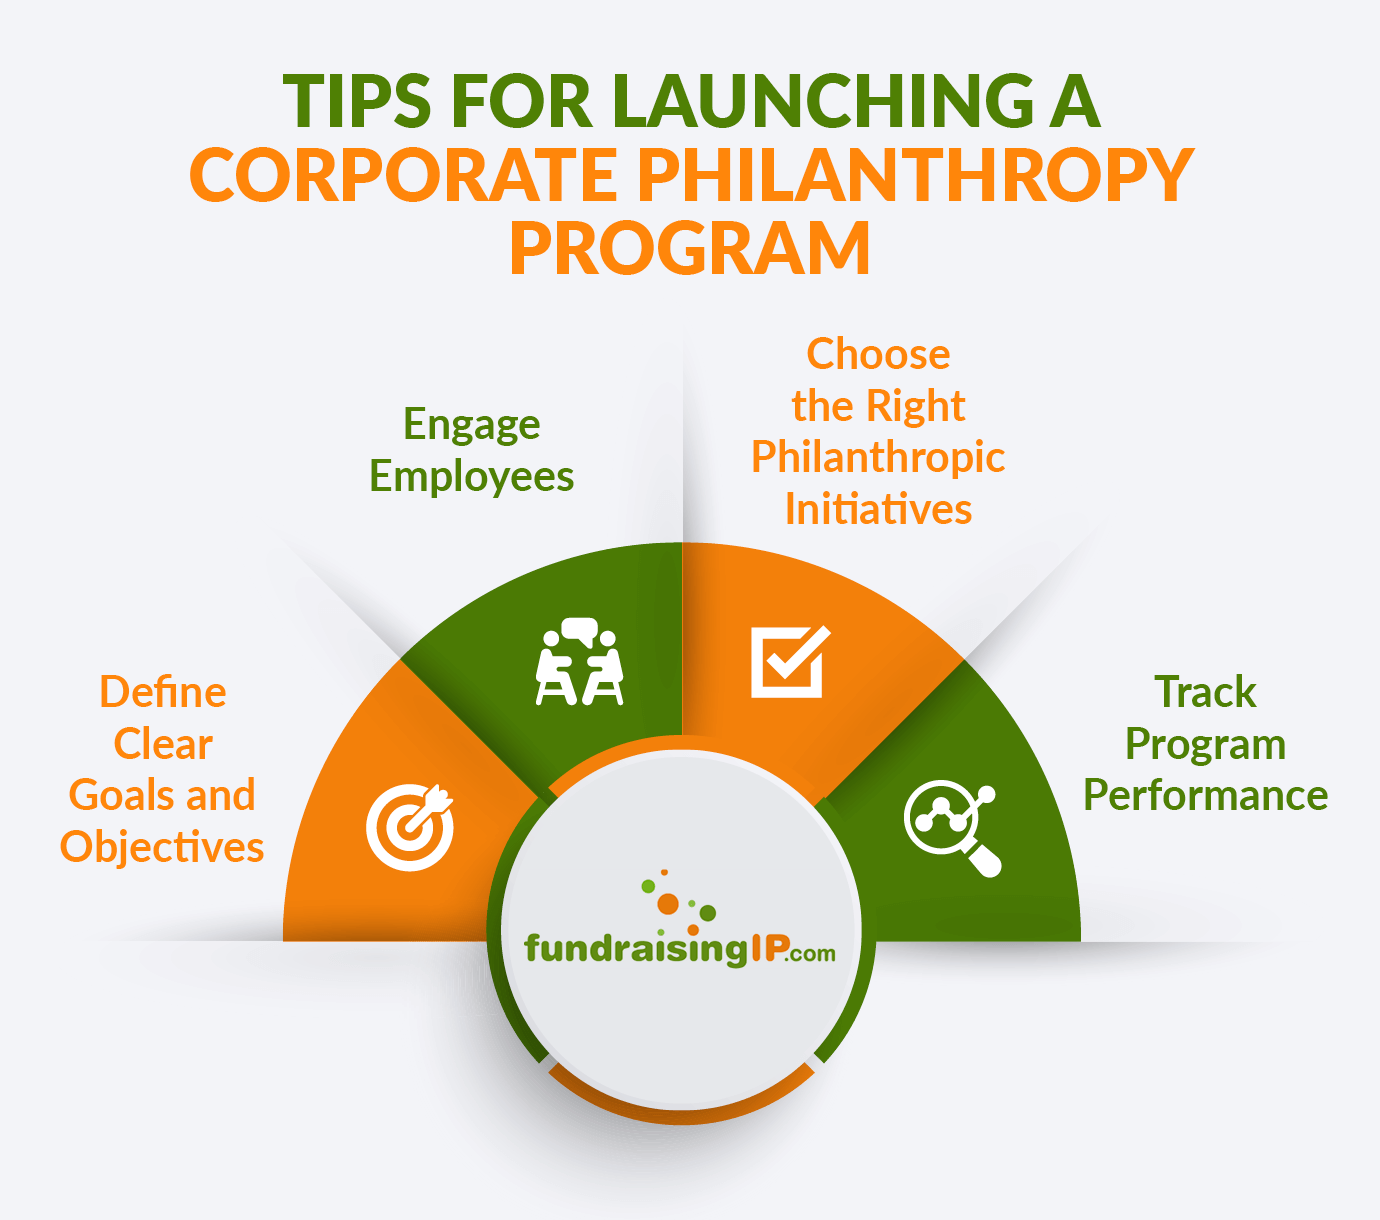 This image shows tips for launching a corporate philanthropy program, as outlined in the text below.